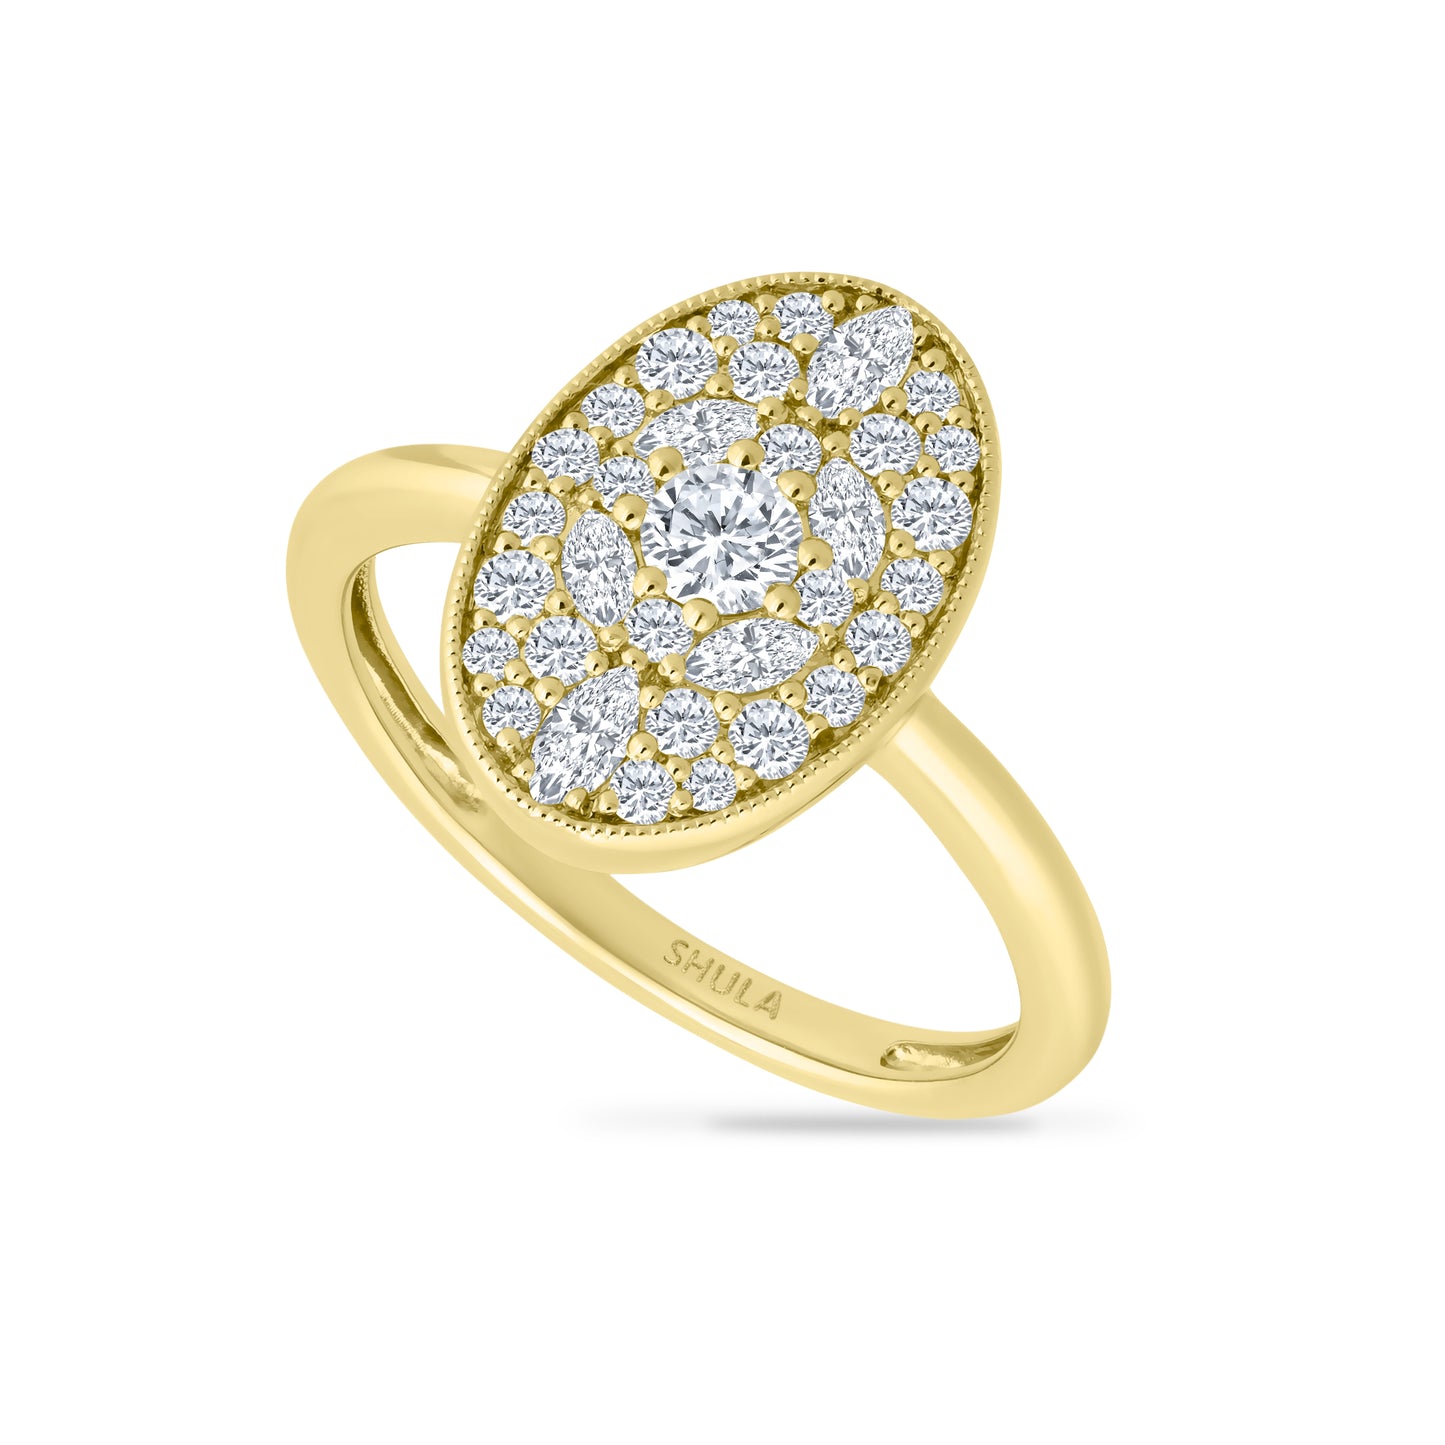 14K YELLOW GOLD OVAL DESING RING WITH MARQUISE DIAMONDS 0.28CT & ROUND DIAMONDS 0.47CT